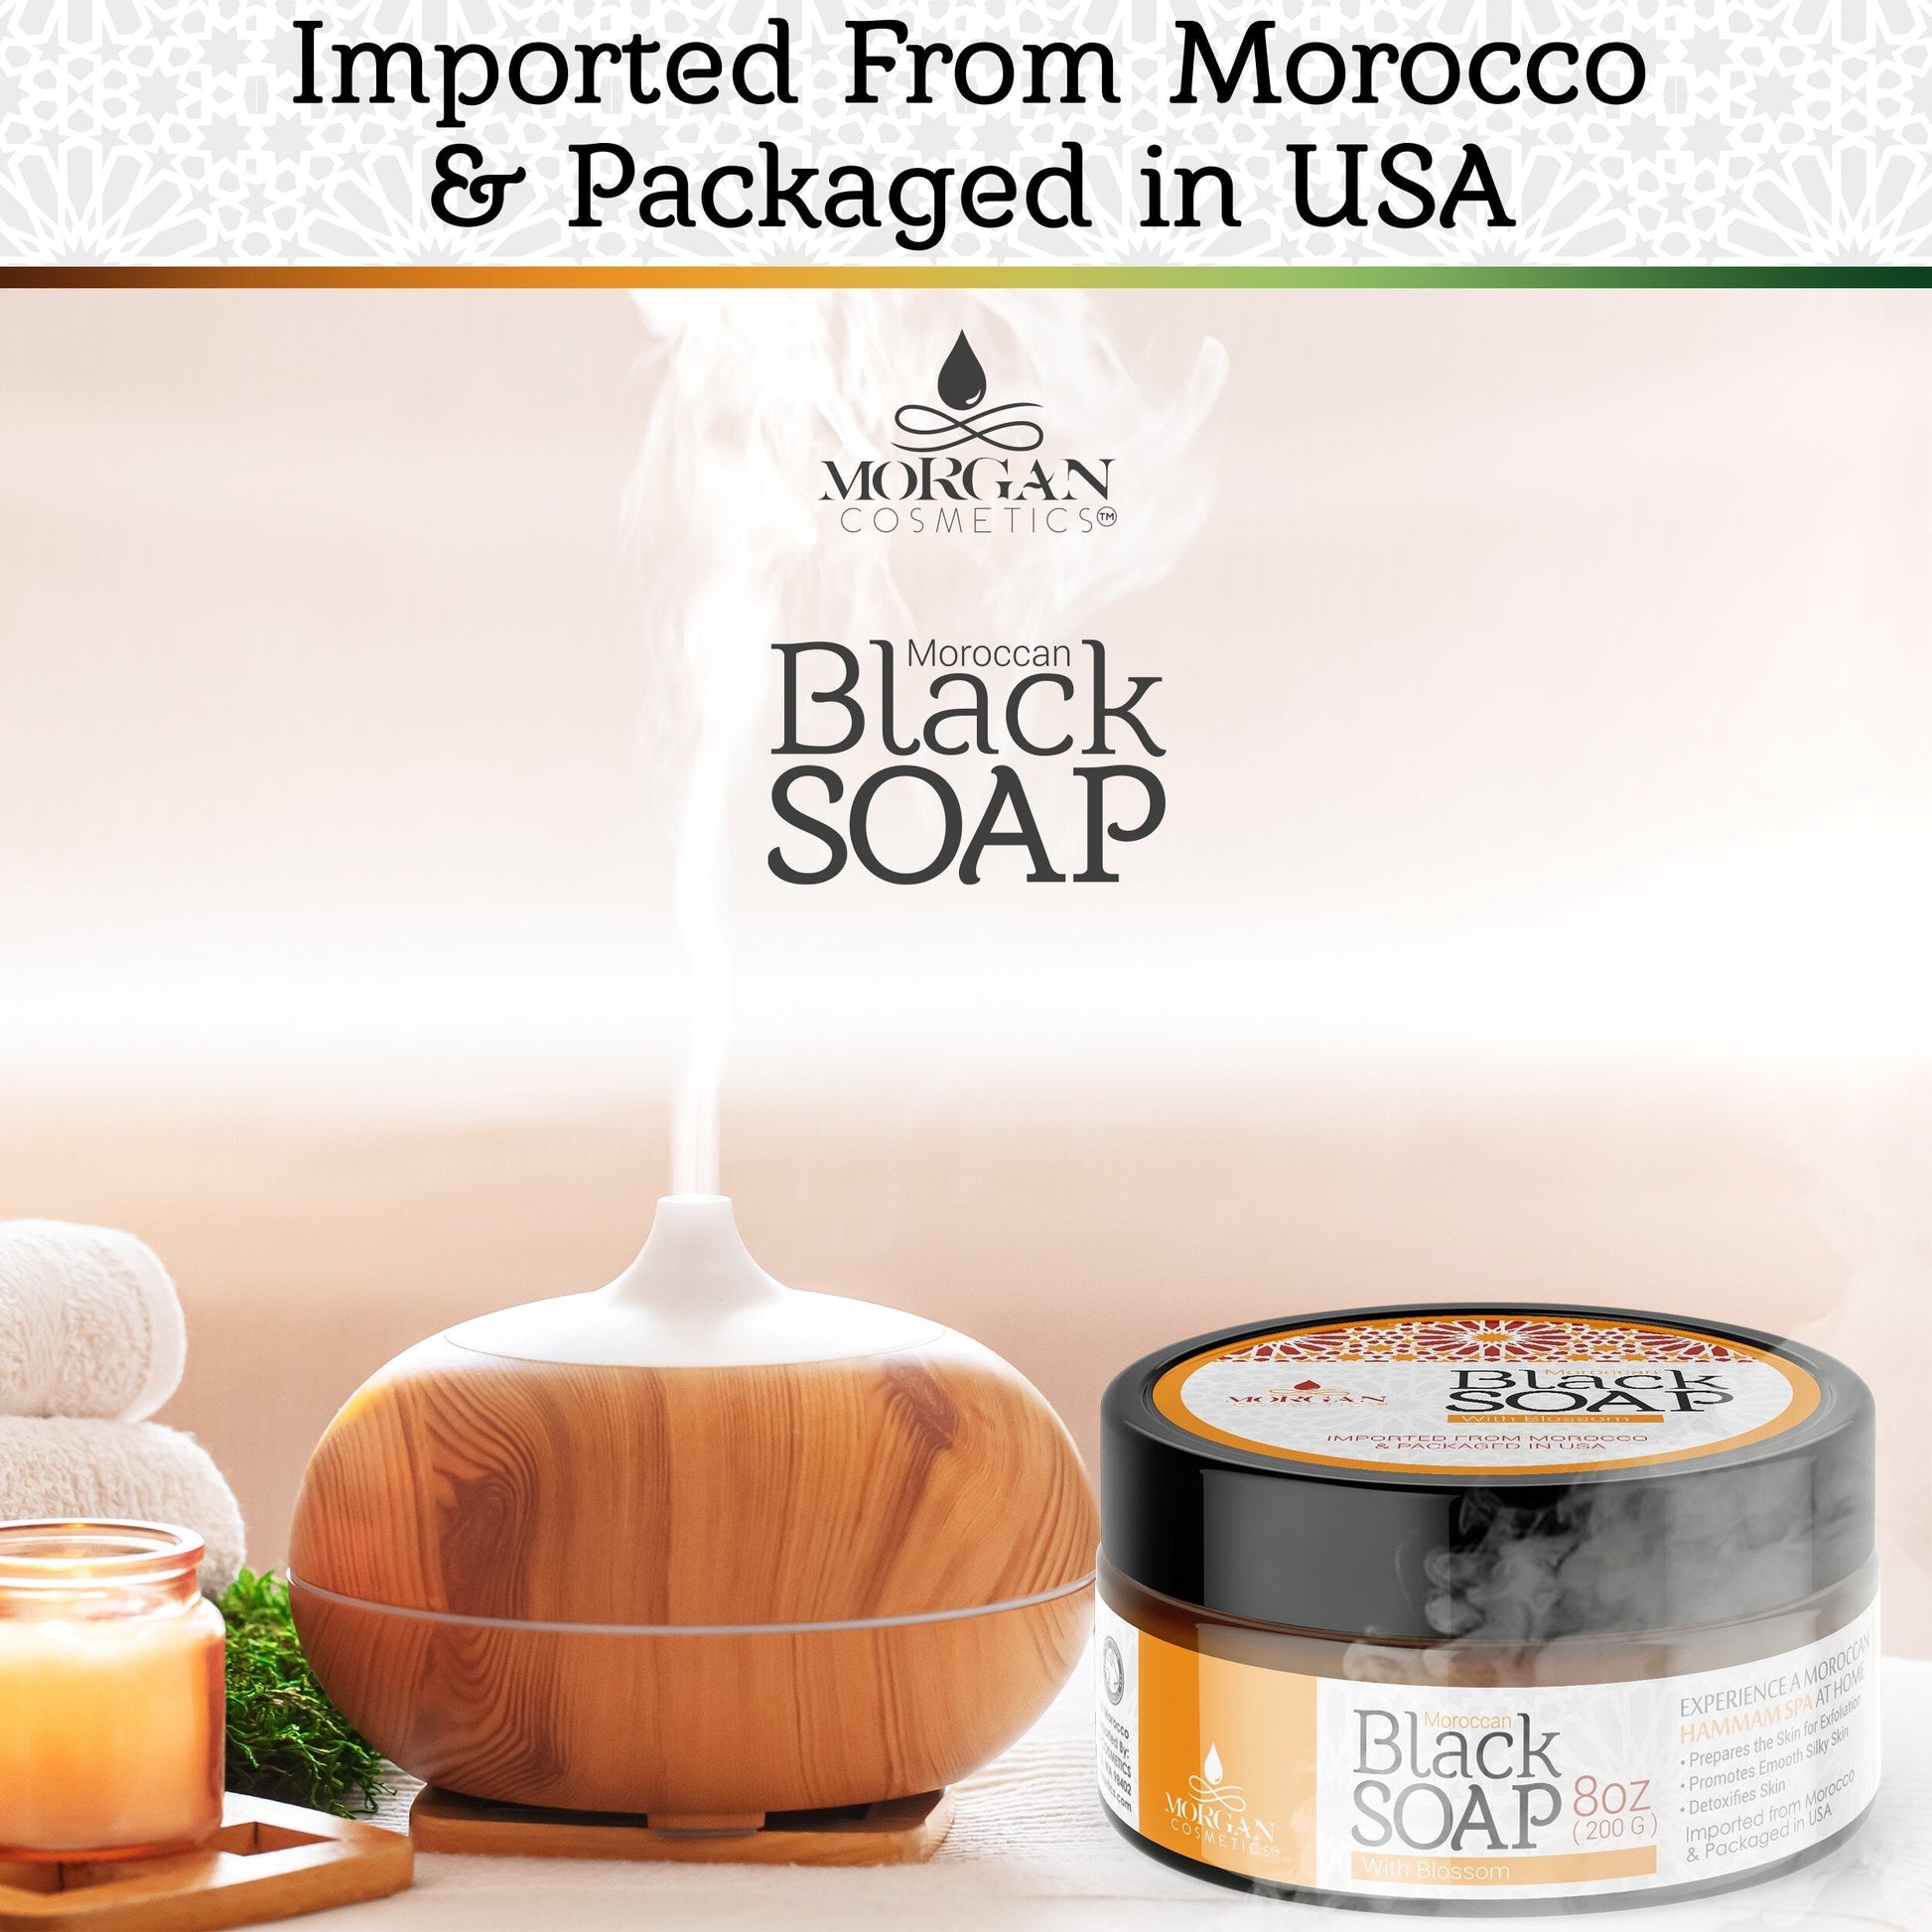 Moroccan Black Soap with Herbs 8 oz freeshipping - morgancosmeticsofficial